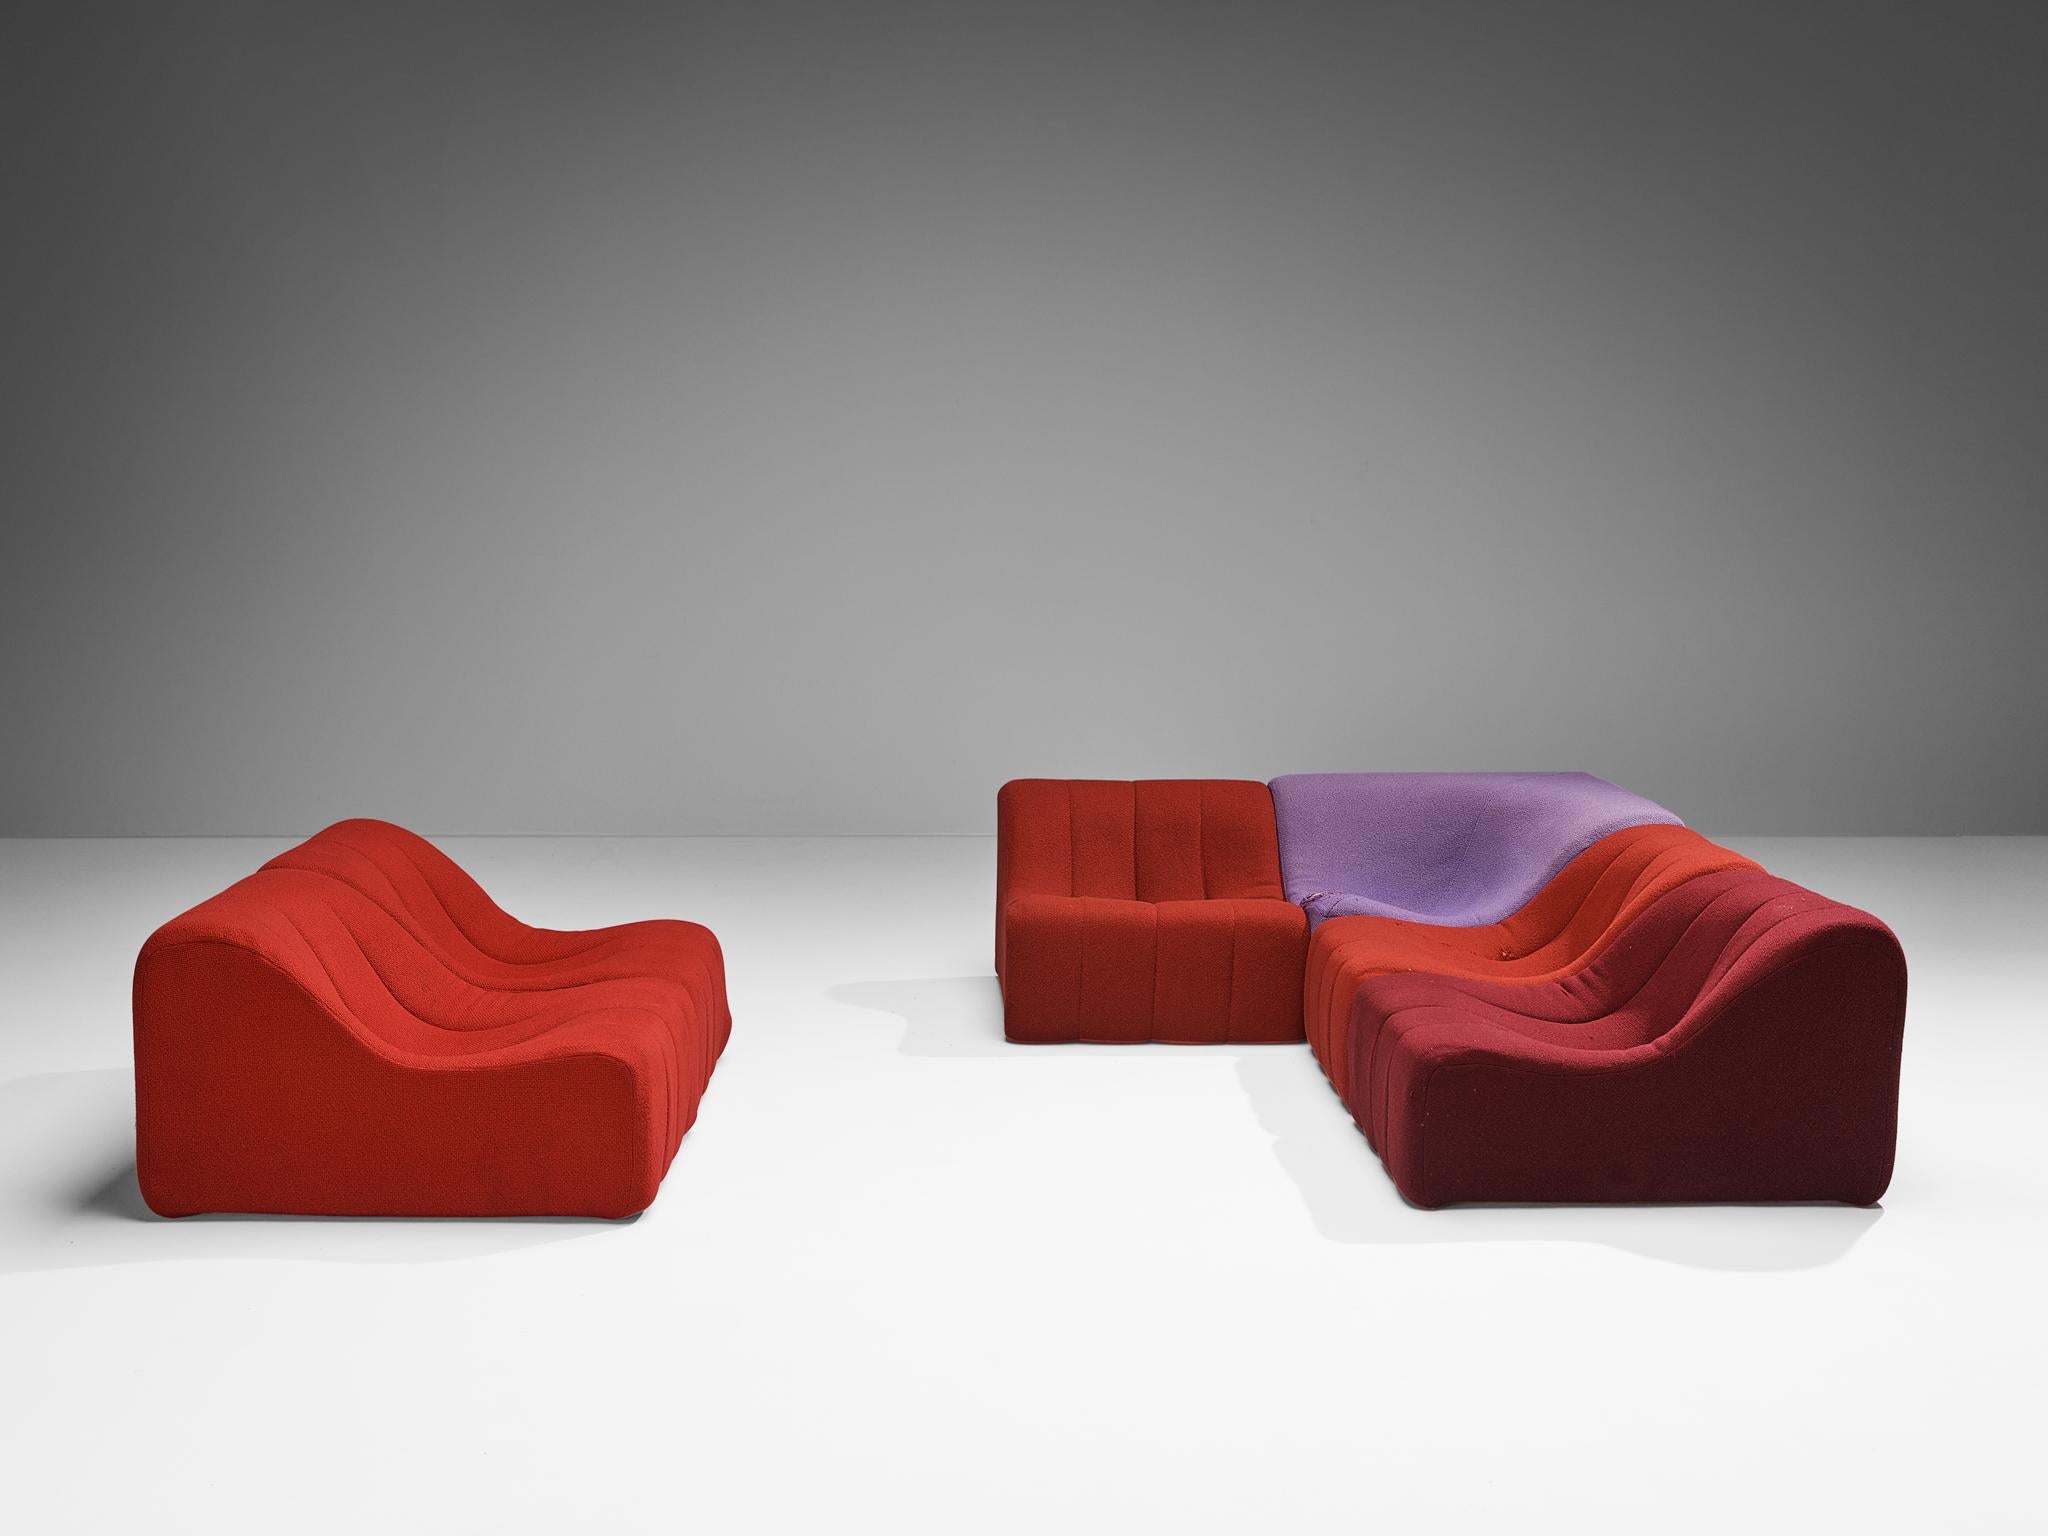 Kwok Hoi Chan for Steiner 'Chromatic' Modular Sofa in Red Purple Colors  For Sale 3